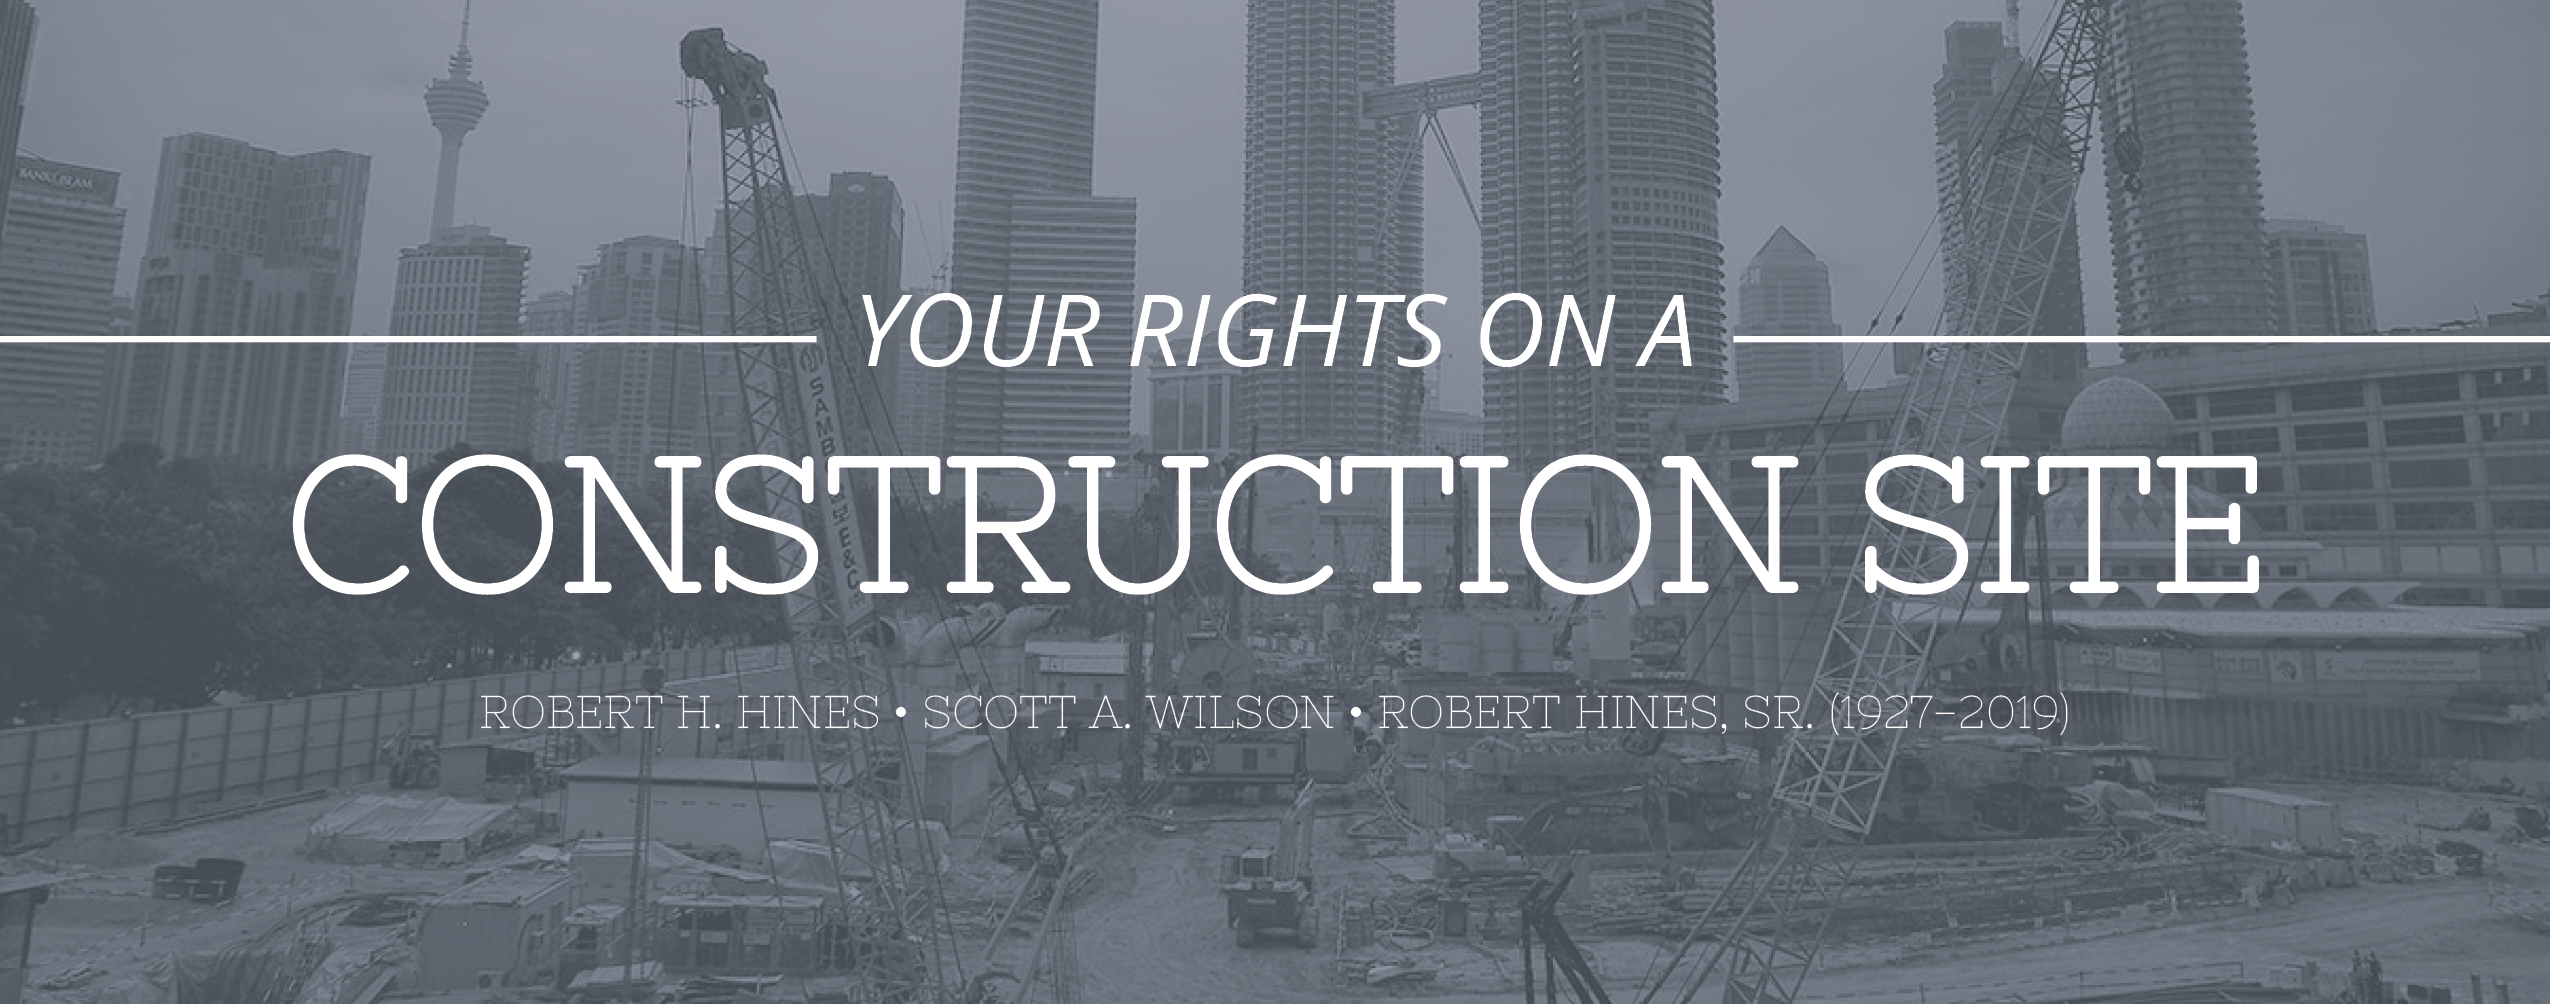 your rights on a construction site white paper header